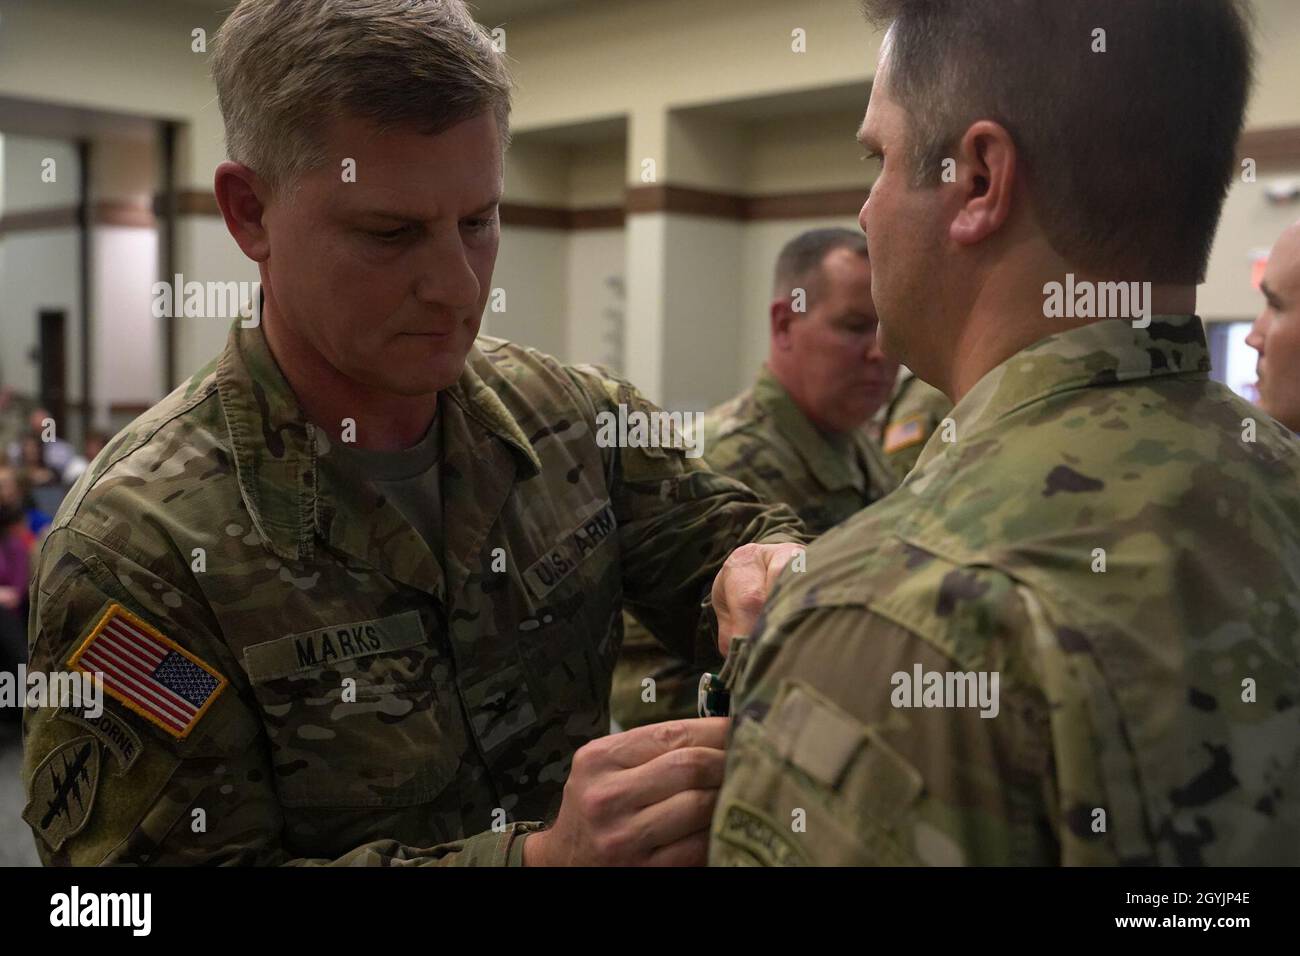 Col. Steven M. Marks, deputy commander, 1st Special Forces Command (Airborne) awards a Soldier from 2nd Battalion, 7th Special Forces Group (Airborne) in recognition of valorous acts during the Battalion’s recent deployment in support of Operation Resolute Support. The ceremony was held at Liberty chapel on Jan. 9. (Photo by Spc.Vargas, Jose) Stock Photo